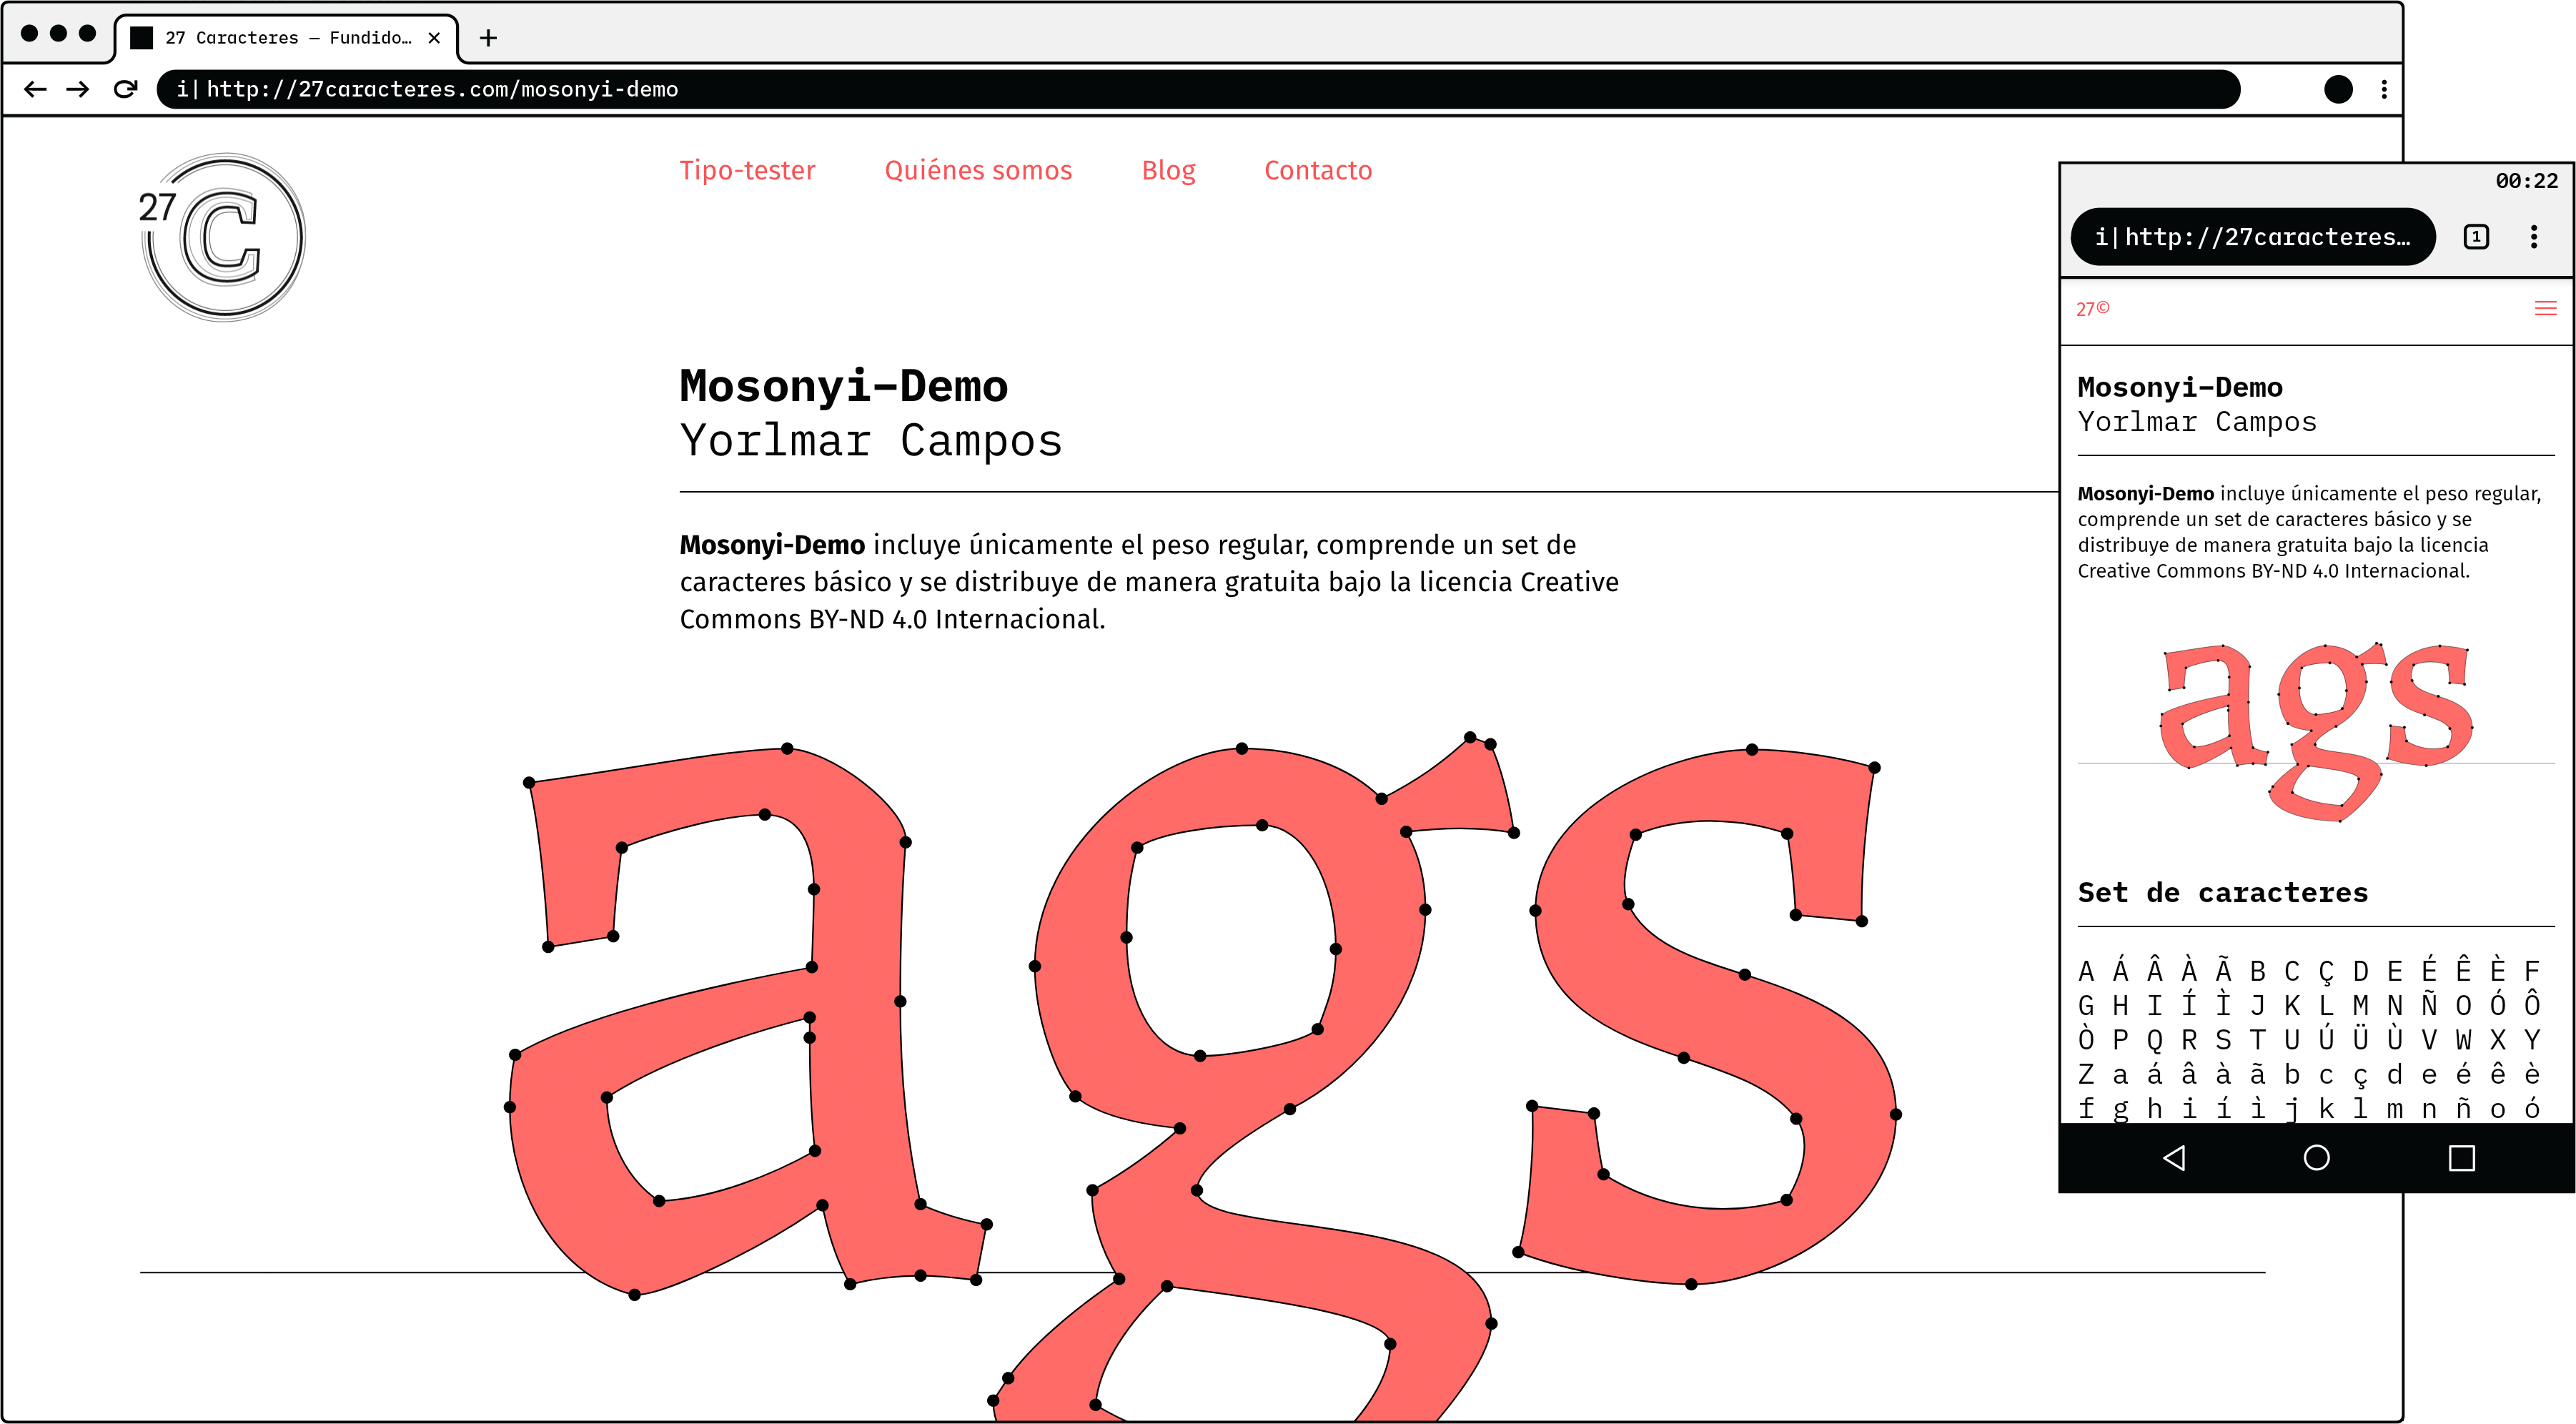 27 Caracteres Website Fonts In Use